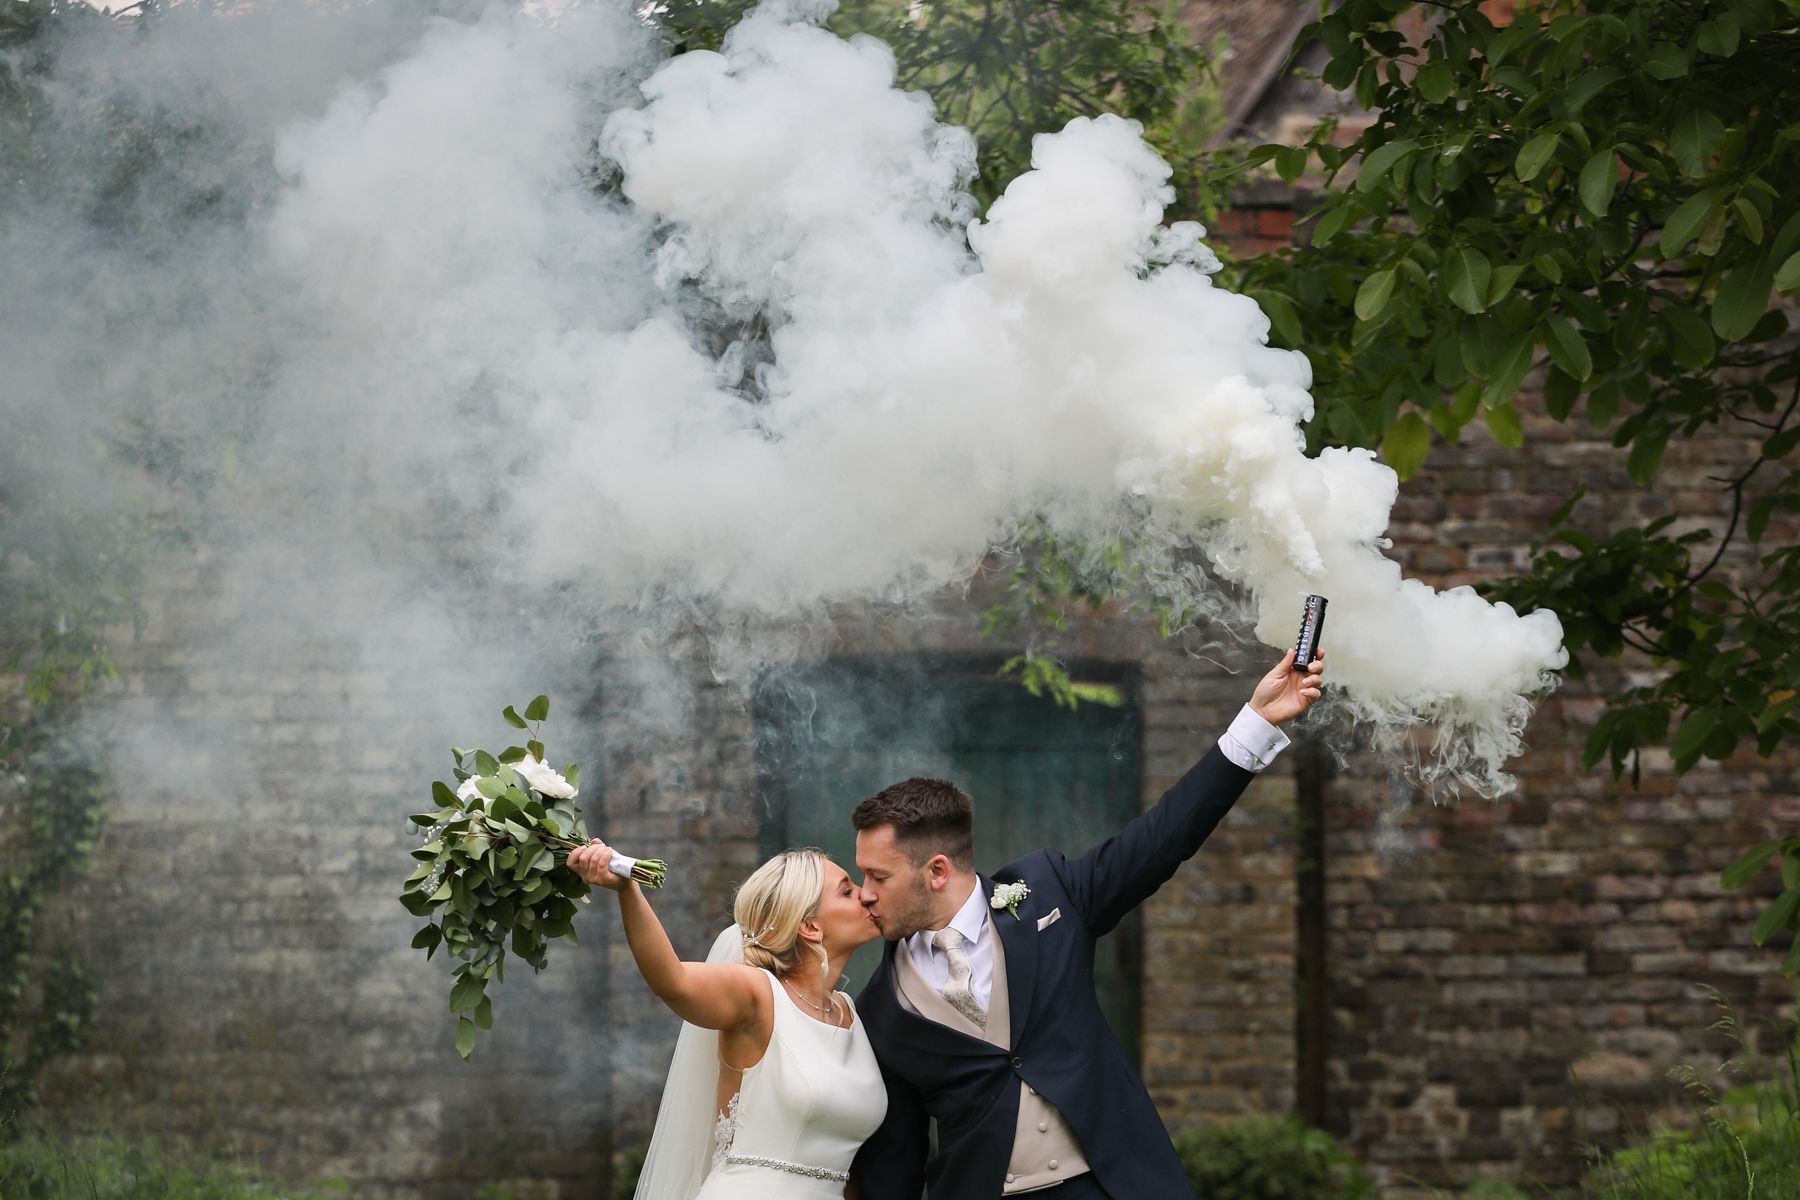 Katie and Matt's outdoor ceremony at Eastington Park in May